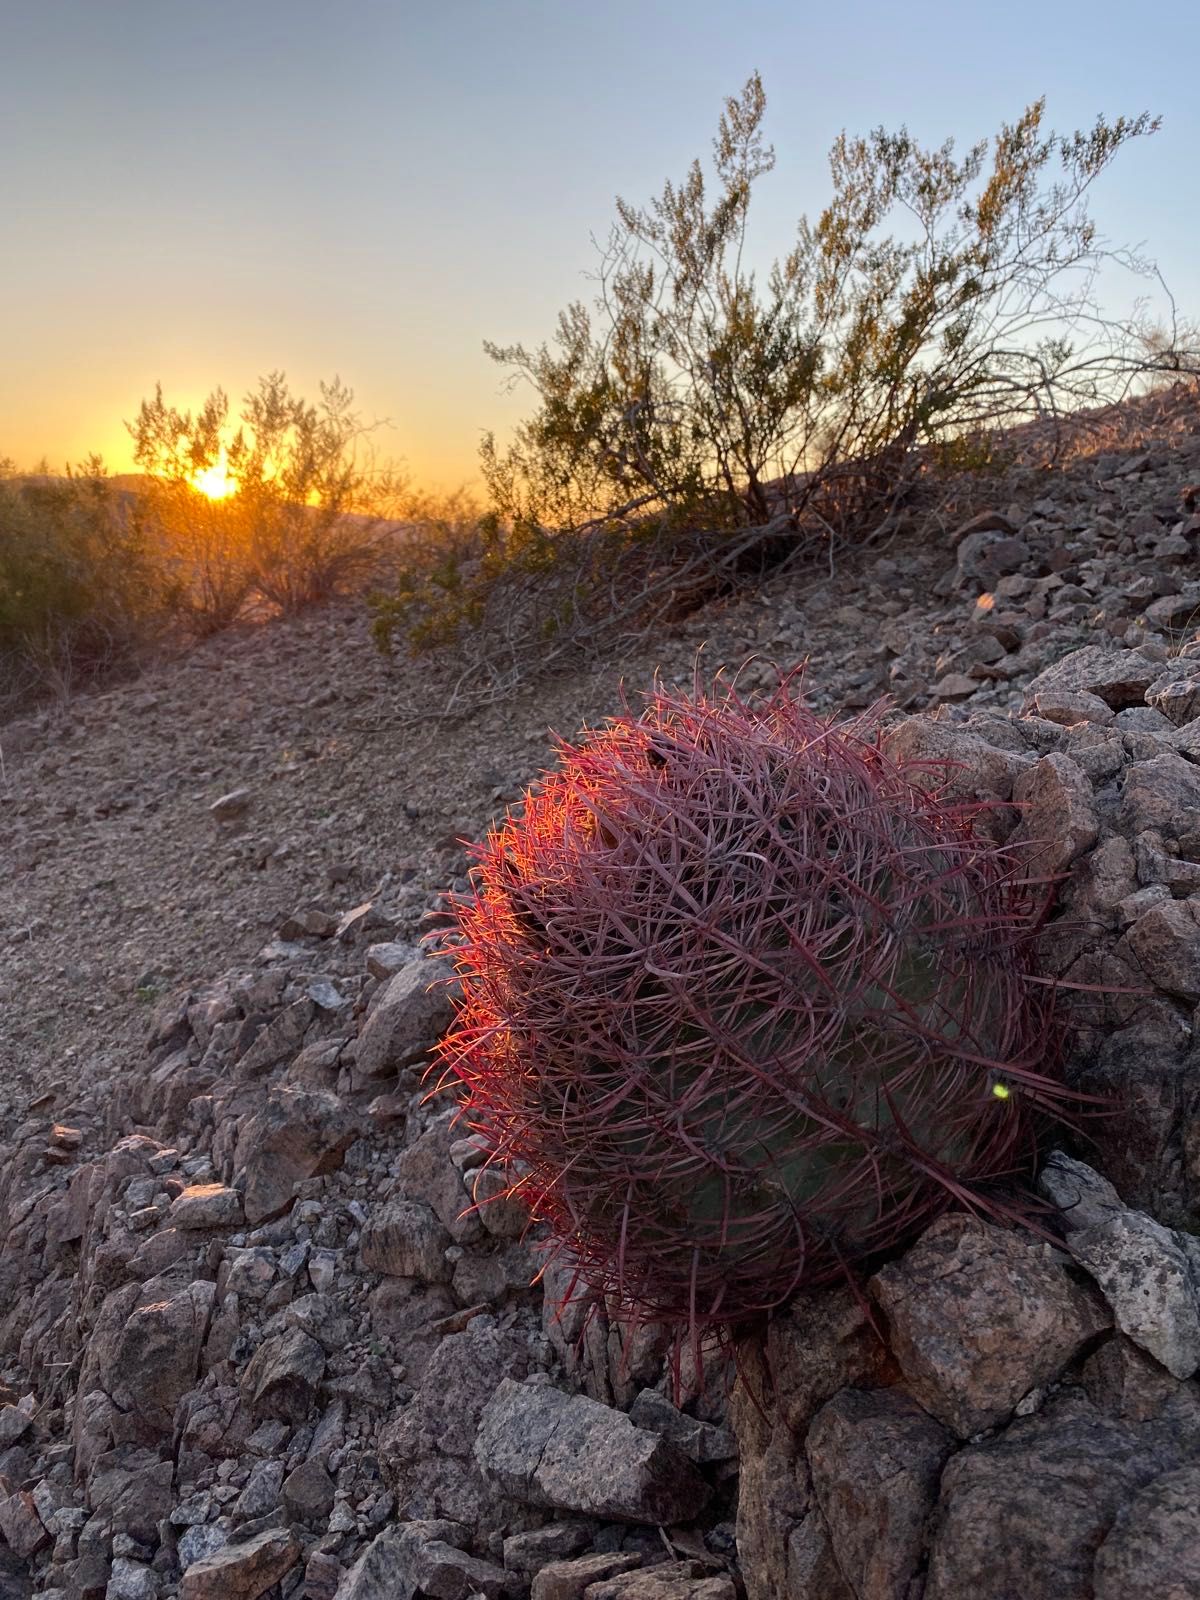 view from this evening’s meditation hike in the sonoran desert of arizona